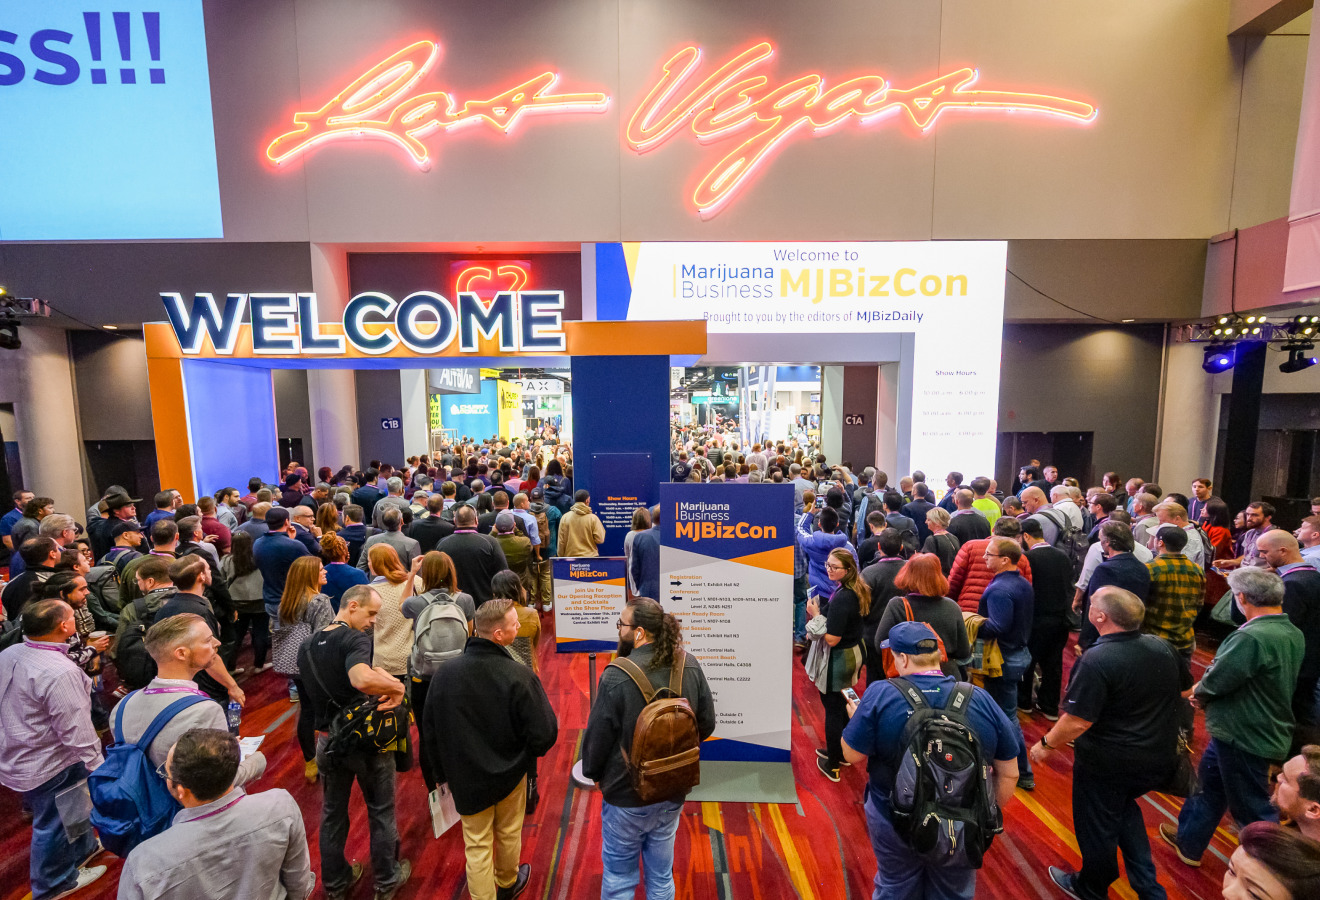 Every year, more cannabis industry deals get done at MJBizCon than any other event by far. If you are seeking partnerships, business advice, investors, career connections, new products and services or to network with industry peers, MJBizCon is the place to do it.